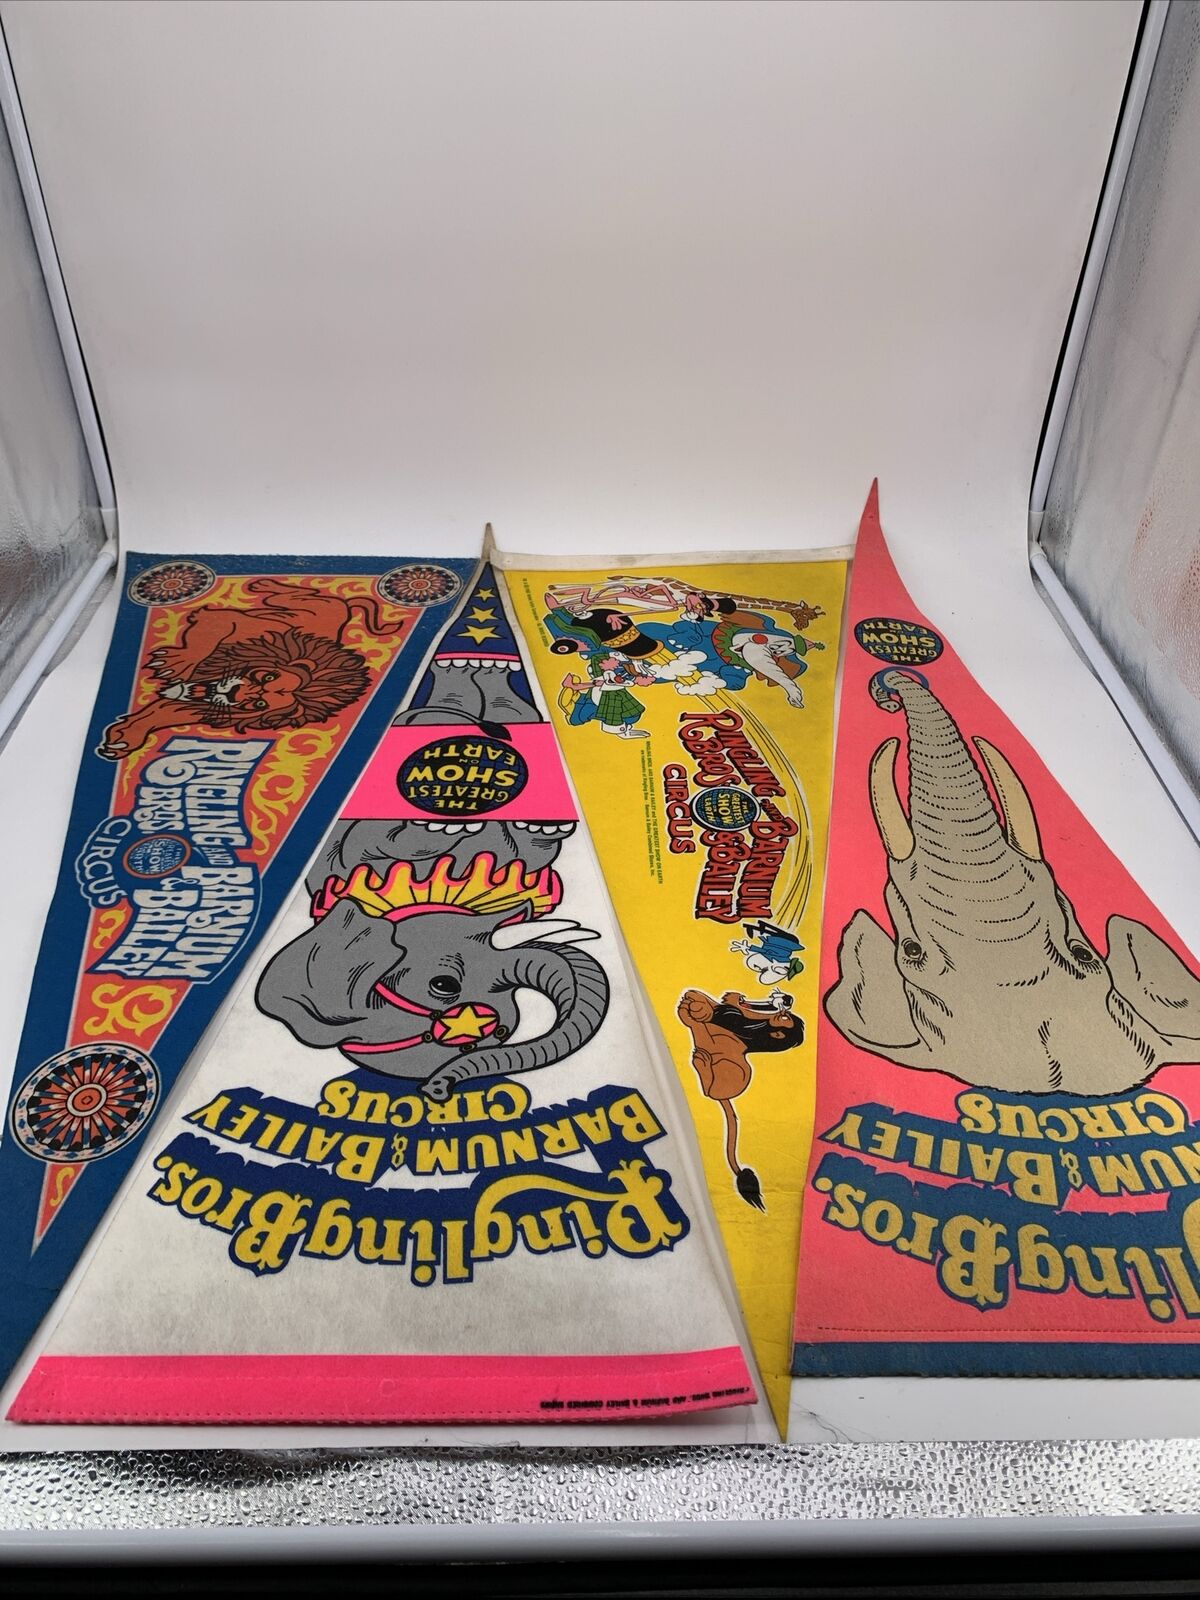 Lot of 4 Vintage Ringling Bros Circus Pennants. Greatest Show on Earth